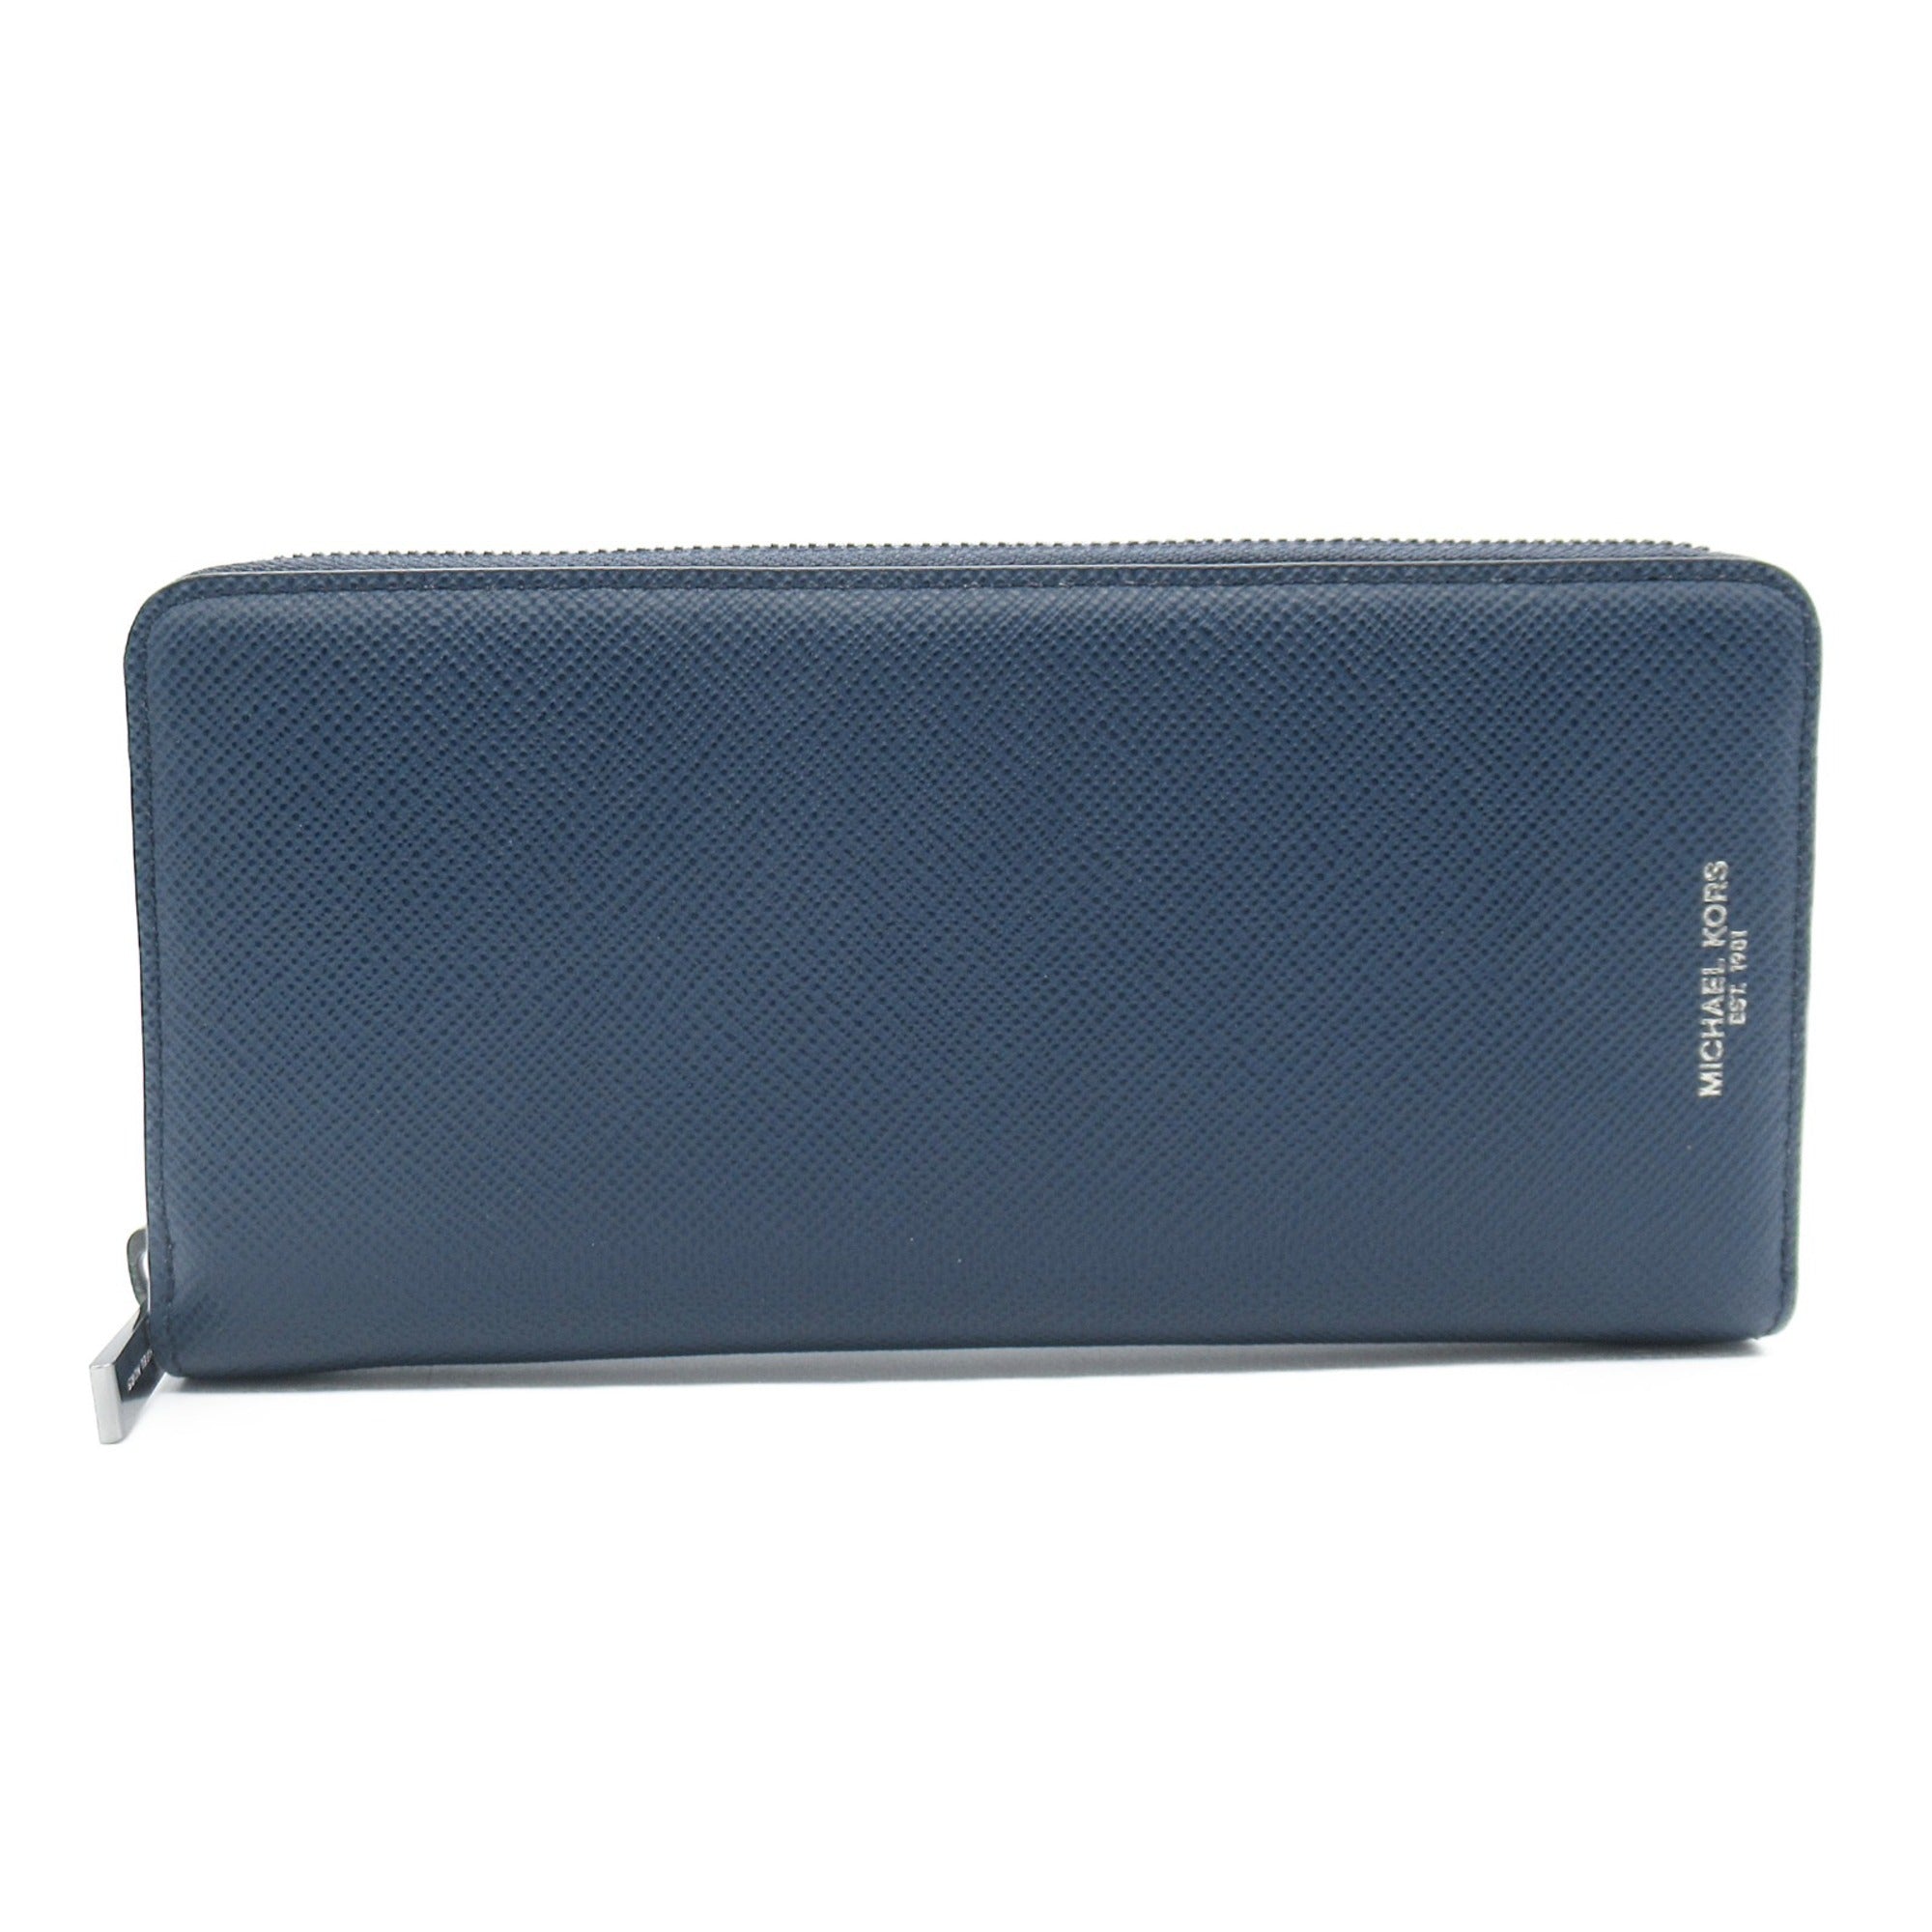 Round Long Wallet Navy Leather 39F5LHRE3L406